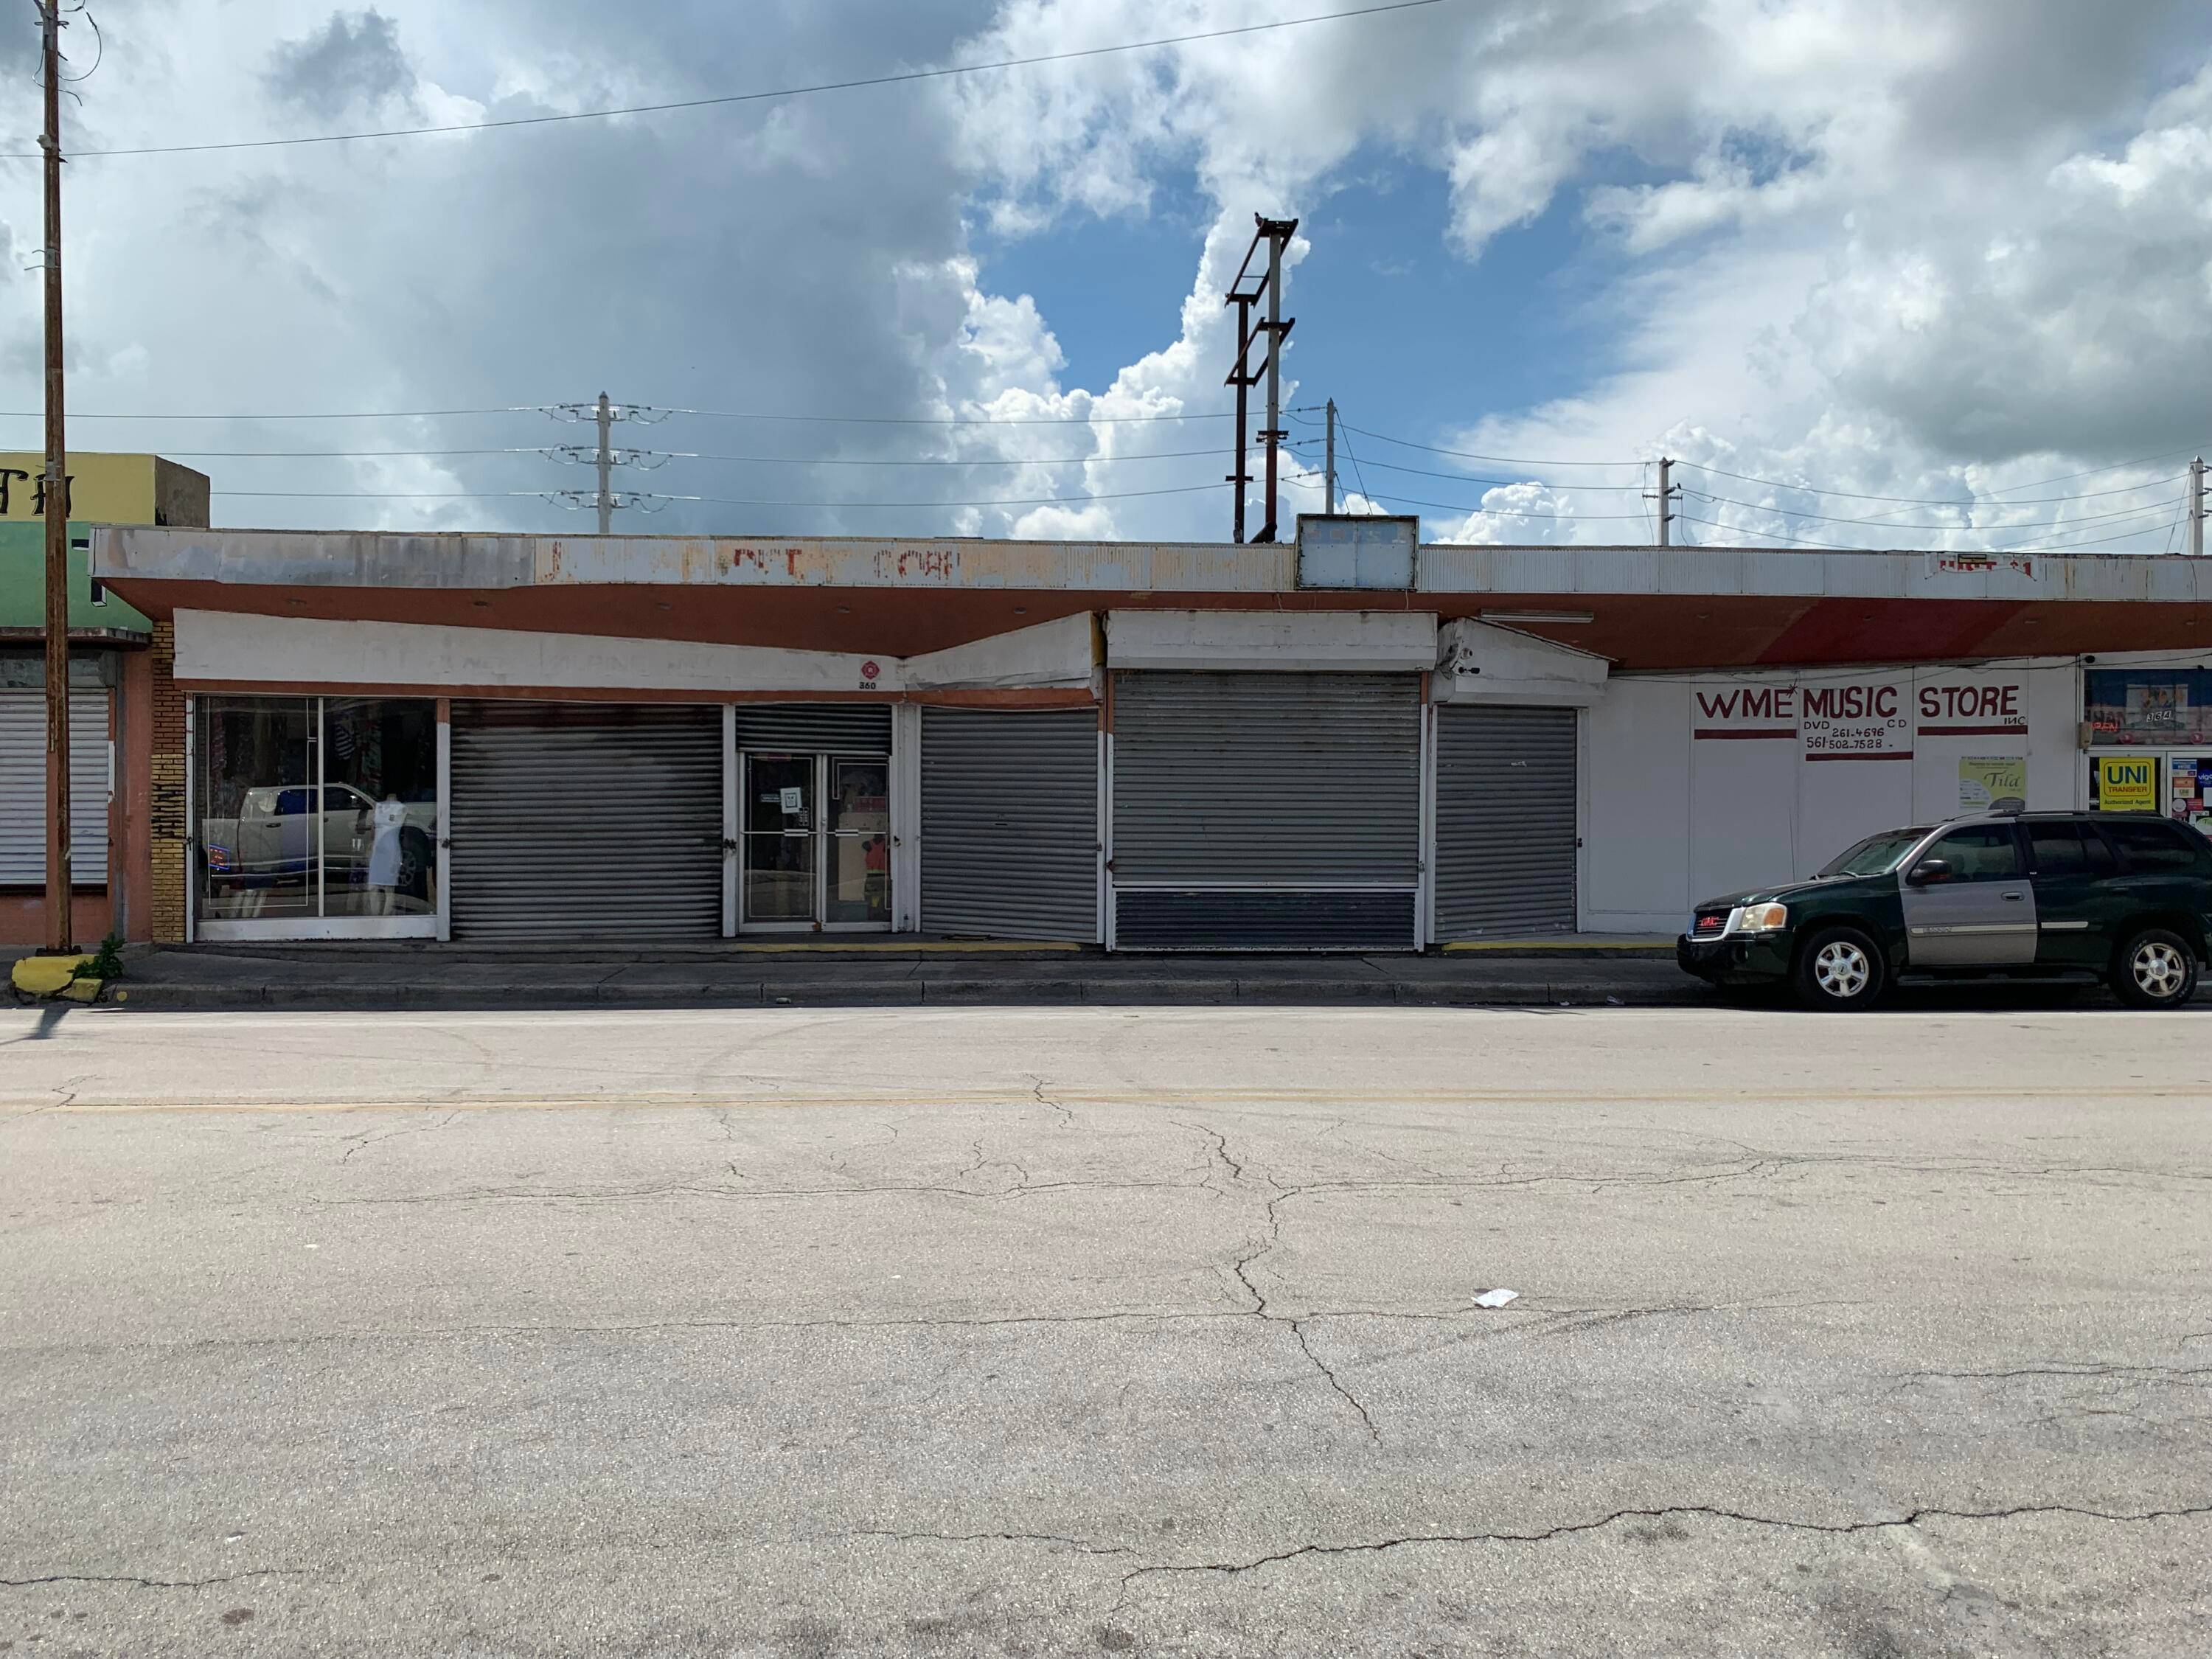 Belle Glade commercial district perfect location.